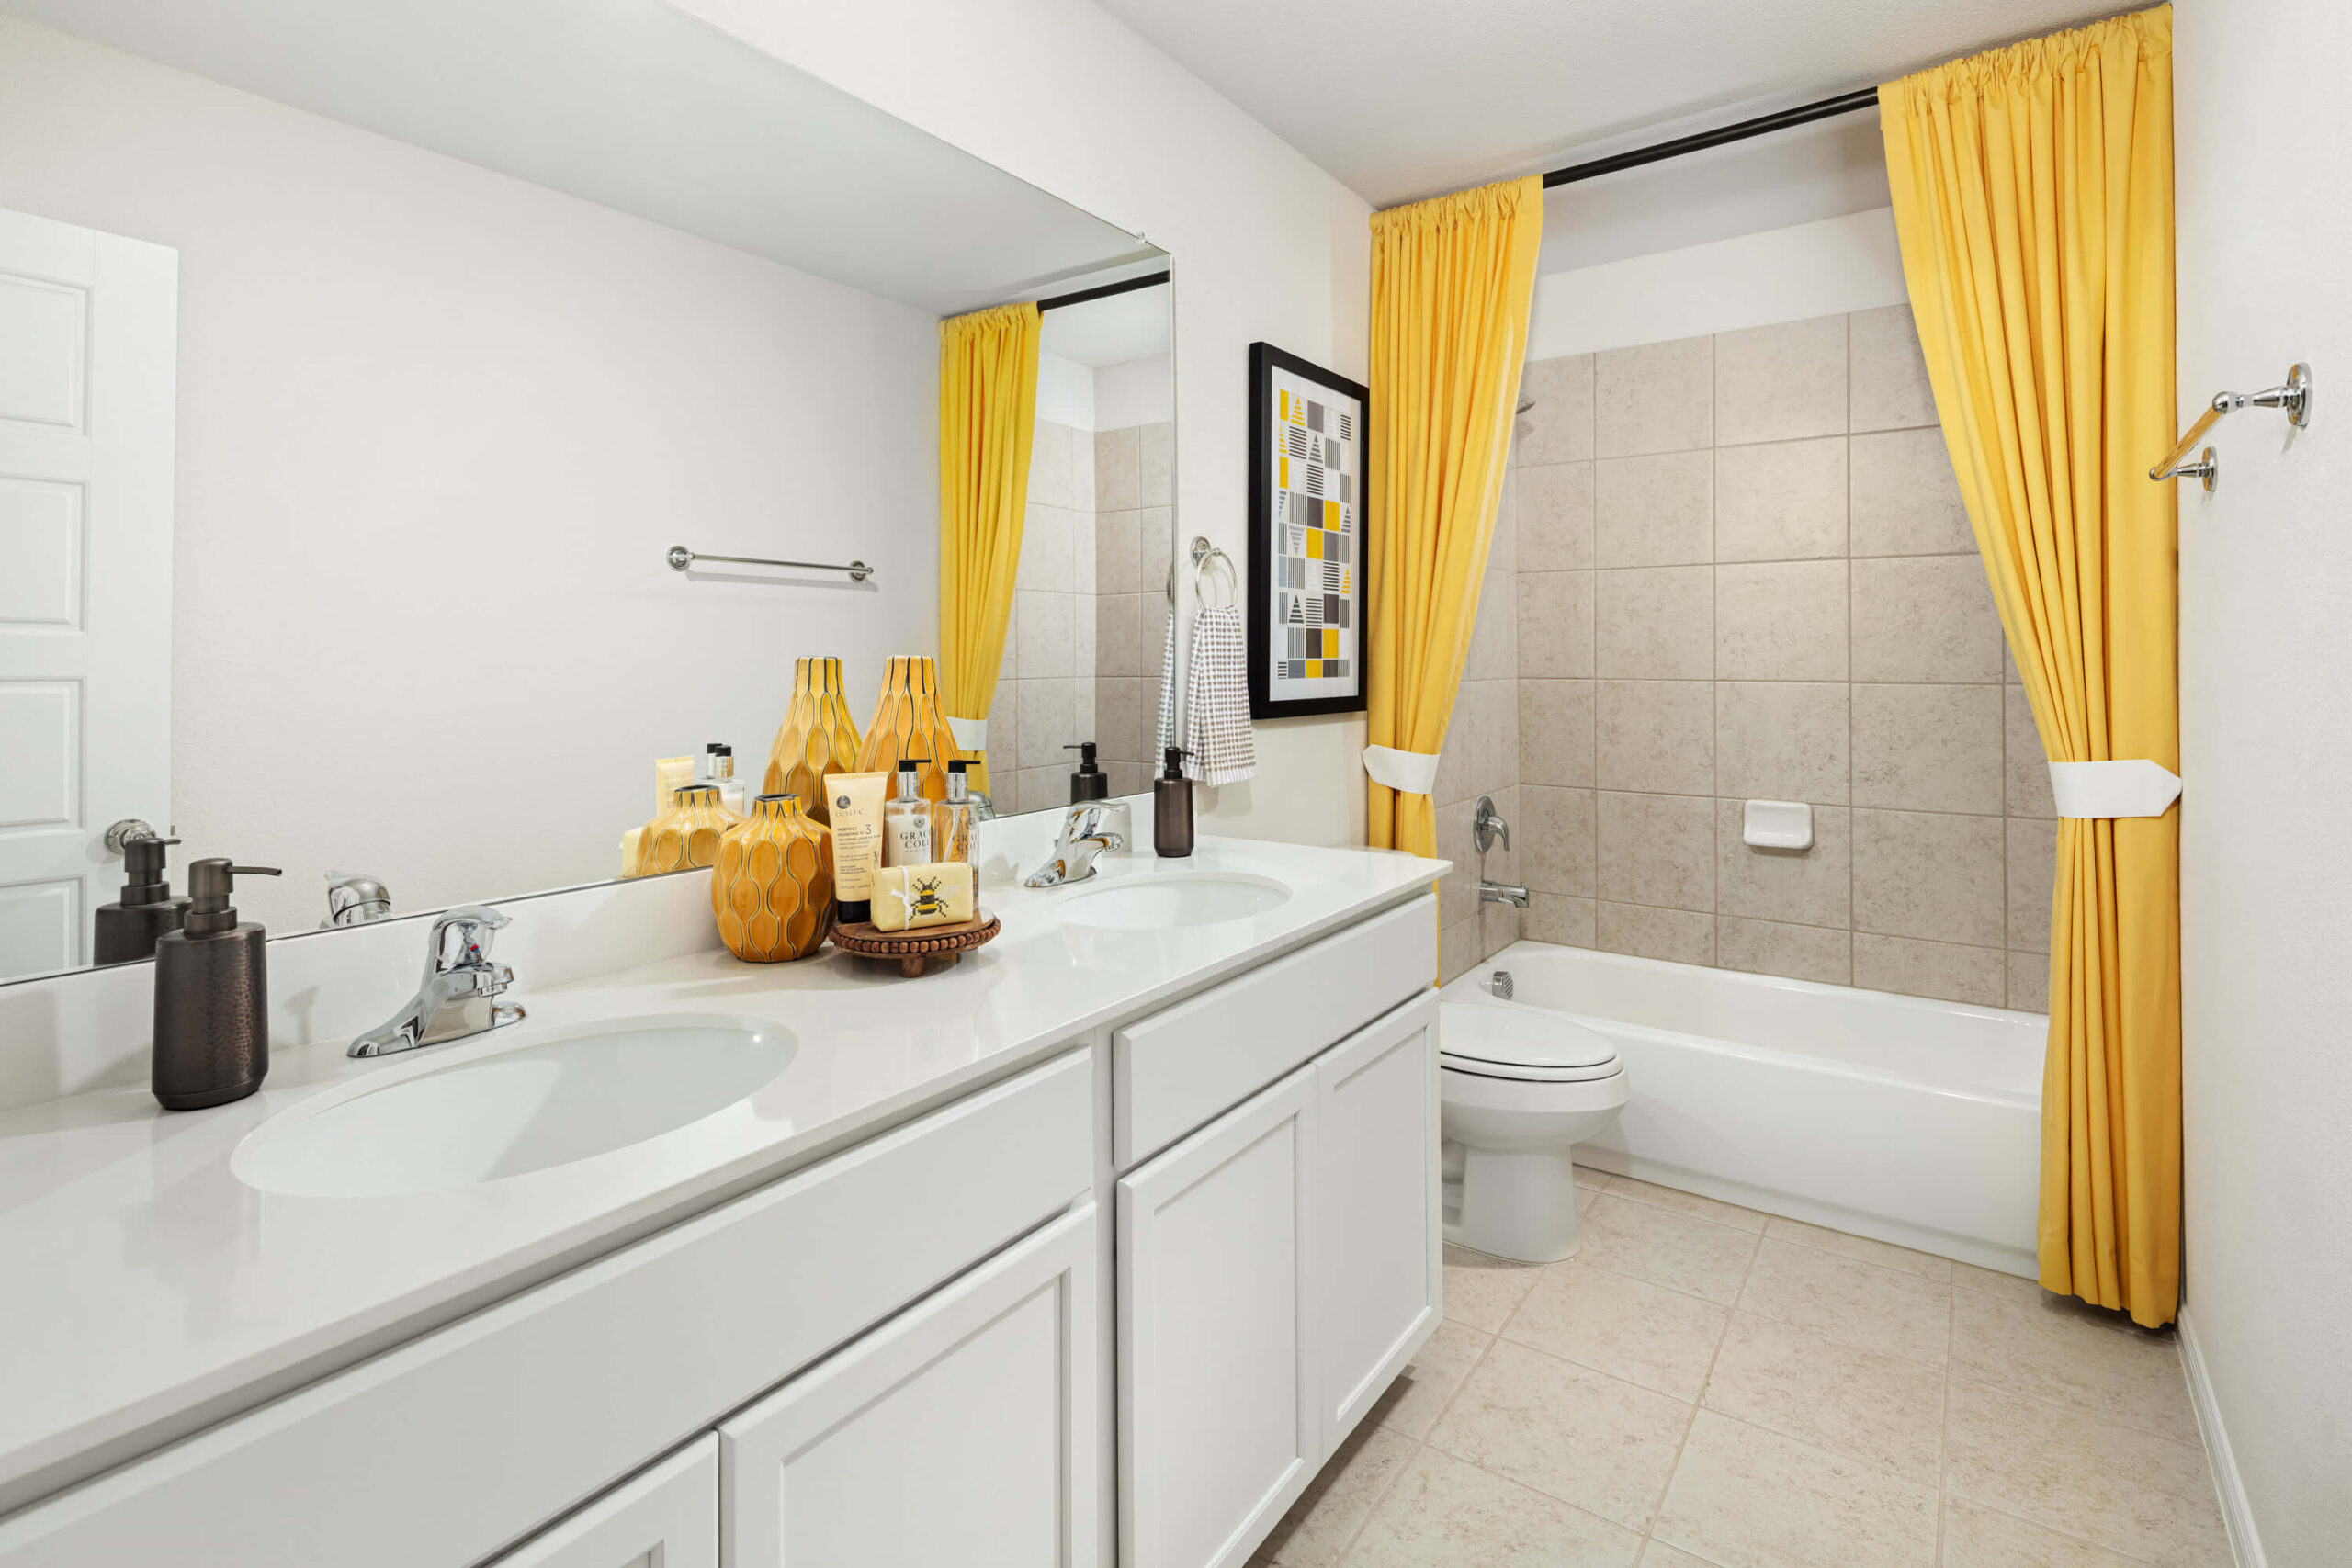 A clean, bright bathroom in new homes in Mansfield TX with a double vanity, a bathtub, and yellow accents.